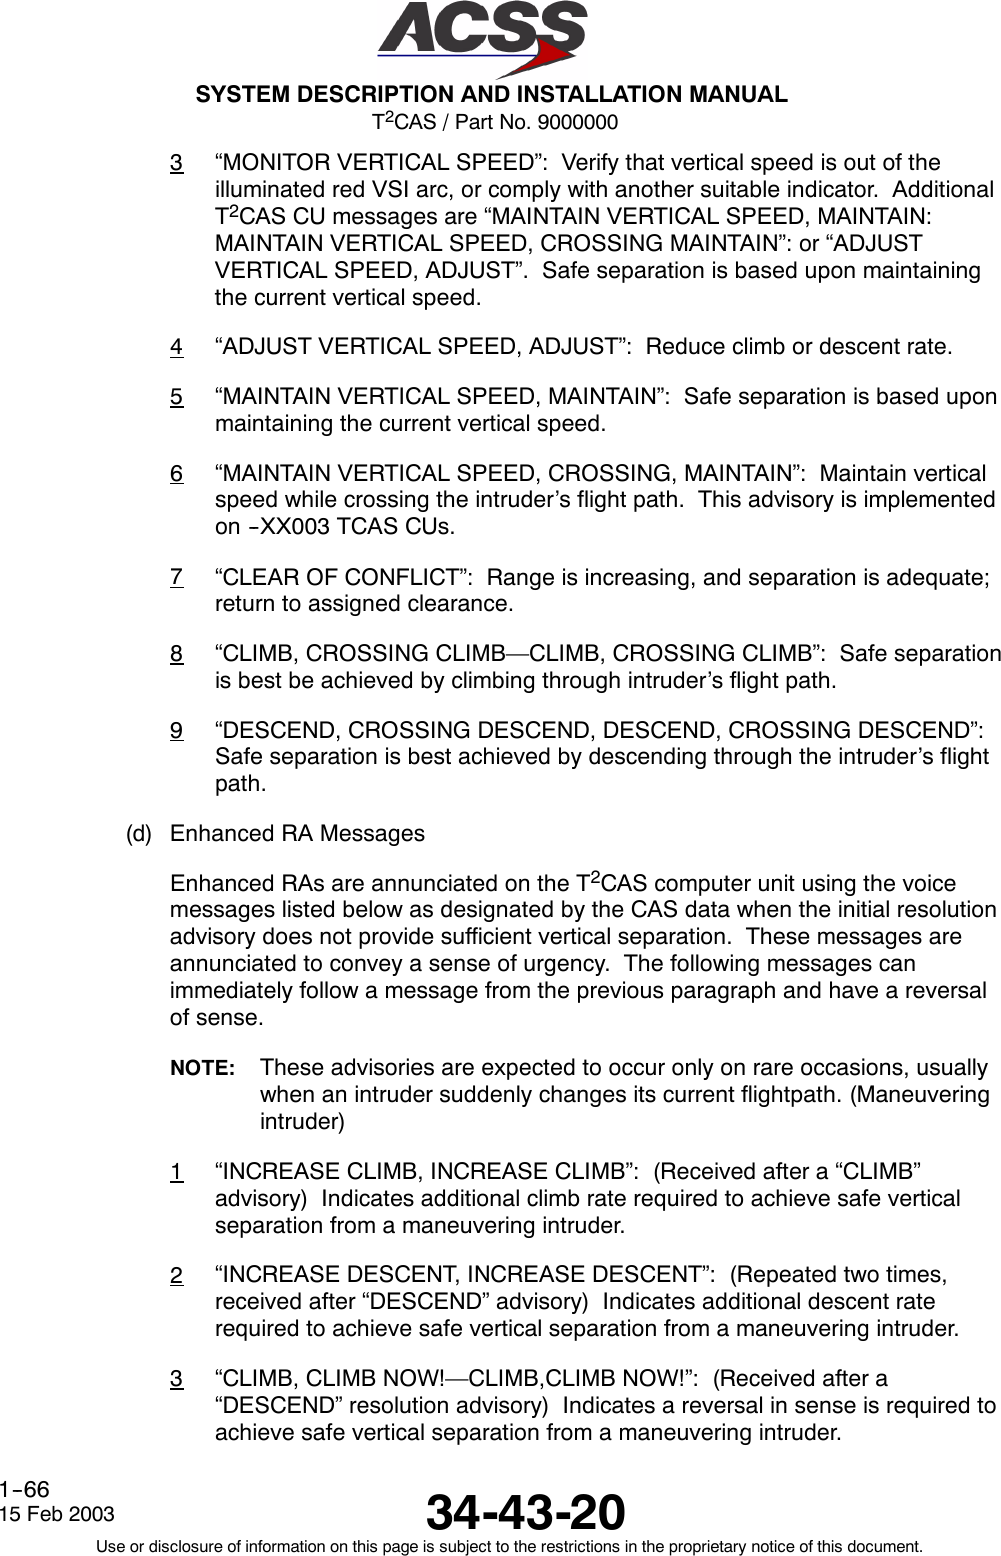 T2CAS / Part No. 9000000SYSTEM DESCRIPTION AND INSTALLATION MANUAL34-43-2015 Feb 2003Use or disclosure of information on this page is subject to the restrictions in the proprietary notice of this document.1--663“MONITOR VERTICAL SPEED”: Verify that vertical speed is out of theilluminated red VSI arc, or comply with another suitable indicator. AdditionalT2CAS CU messages are “MAINTAIN VERTICAL SPEED, MAINTAIN:MAINTAIN VERTICAL SPEED, CROSSING MAINTAIN”: or “ADJUSTVERTICAL SPEED, ADJUST”. Safe separation is based upon maintainingthe current vertical speed.4“ADJUST VERTICAL SPEED, ADJUST”: Reduce climb or descent rate.5“MAINTAIN VERTICAL SPEED, MAINTAIN”: Safe separation is based uponmaintaining the current vertical speed.6“MAINTAIN VERTICAL SPEED, CROSSING, MAINTAIN”: Maintain verticalspeed while crossing the intruder’s flight path. This advisory is implementedon --XX003 TCAS CUs.7“CLEAR OF CONFLICT”: Range is increasing, and separation is adequate;return to assigned clearance.8“CLIMB, CROSSING CLIMB—CLIMB, CROSSING CLIMB”: Safe separationis best be achieved by climbing through intruder’s flight path.9“DESCEND, CROSSING DESCEND, DESCEND, CROSSING DESCEND”:Safe separation is best achieved by descending through the intruder’s flightpath.(d) Enhanced RA MessagesEnhanced RAs are annunciated on the T2CAS computer unit using the voicemessages listed below as designated by the CAS data when the initial resolutionadvisory does not provide sufficient vertical separation. These messages areannunciated to convey a sense of urgency. The following messages canimmediately follow a message from the previous paragraph and have a reversalof sense.NOTE: These advisories are expected to occur only on rare occasions, usuallywhen an intruder suddenly changes its current flightpath. (Maneuveringintruder)1“INCREASE CLIMB, INCREASE CLIMB”: (Received after a “CLIMB”advisory) Indicates additional climb rate required to achieve safe verticalseparation from a maneuvering intruder.2“INCREASE DESCENT, INCREASE DESCENT”: (Repeated two times,received after “DESCEND” advisory) Indicates additional descent raterequired to achieve safe vertical separation from a maneuvering intruder.3“CLIMB, CLIMB NOW!—CLIMB,CLIMB NOW!”: (Received after a“DESCEND” resolution advisory) Indicates a reversal in sense is required toachieve safe vertical separation from a maneuvering intruder.